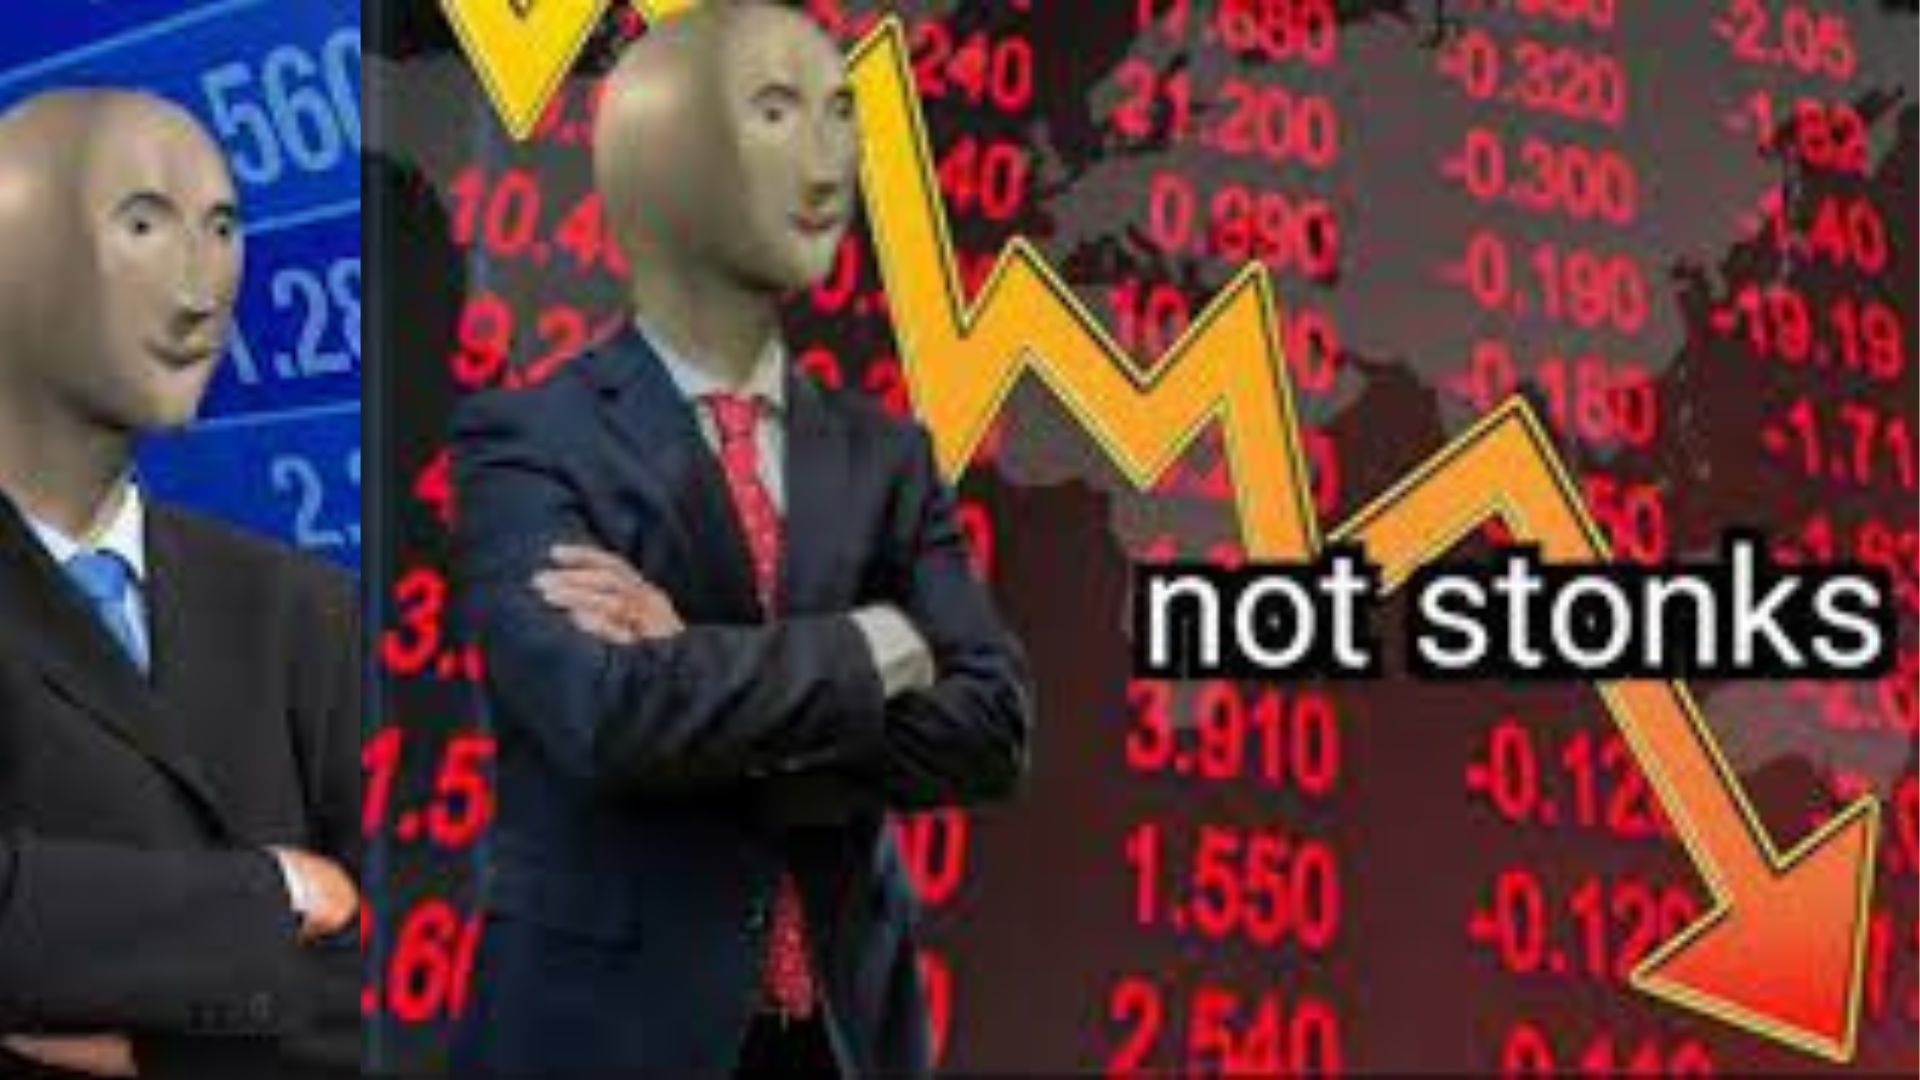 a meme depicting a stock broker standing in front of a "not stonks" downward facing arrow, basically reflecting the NFT market downturn recently